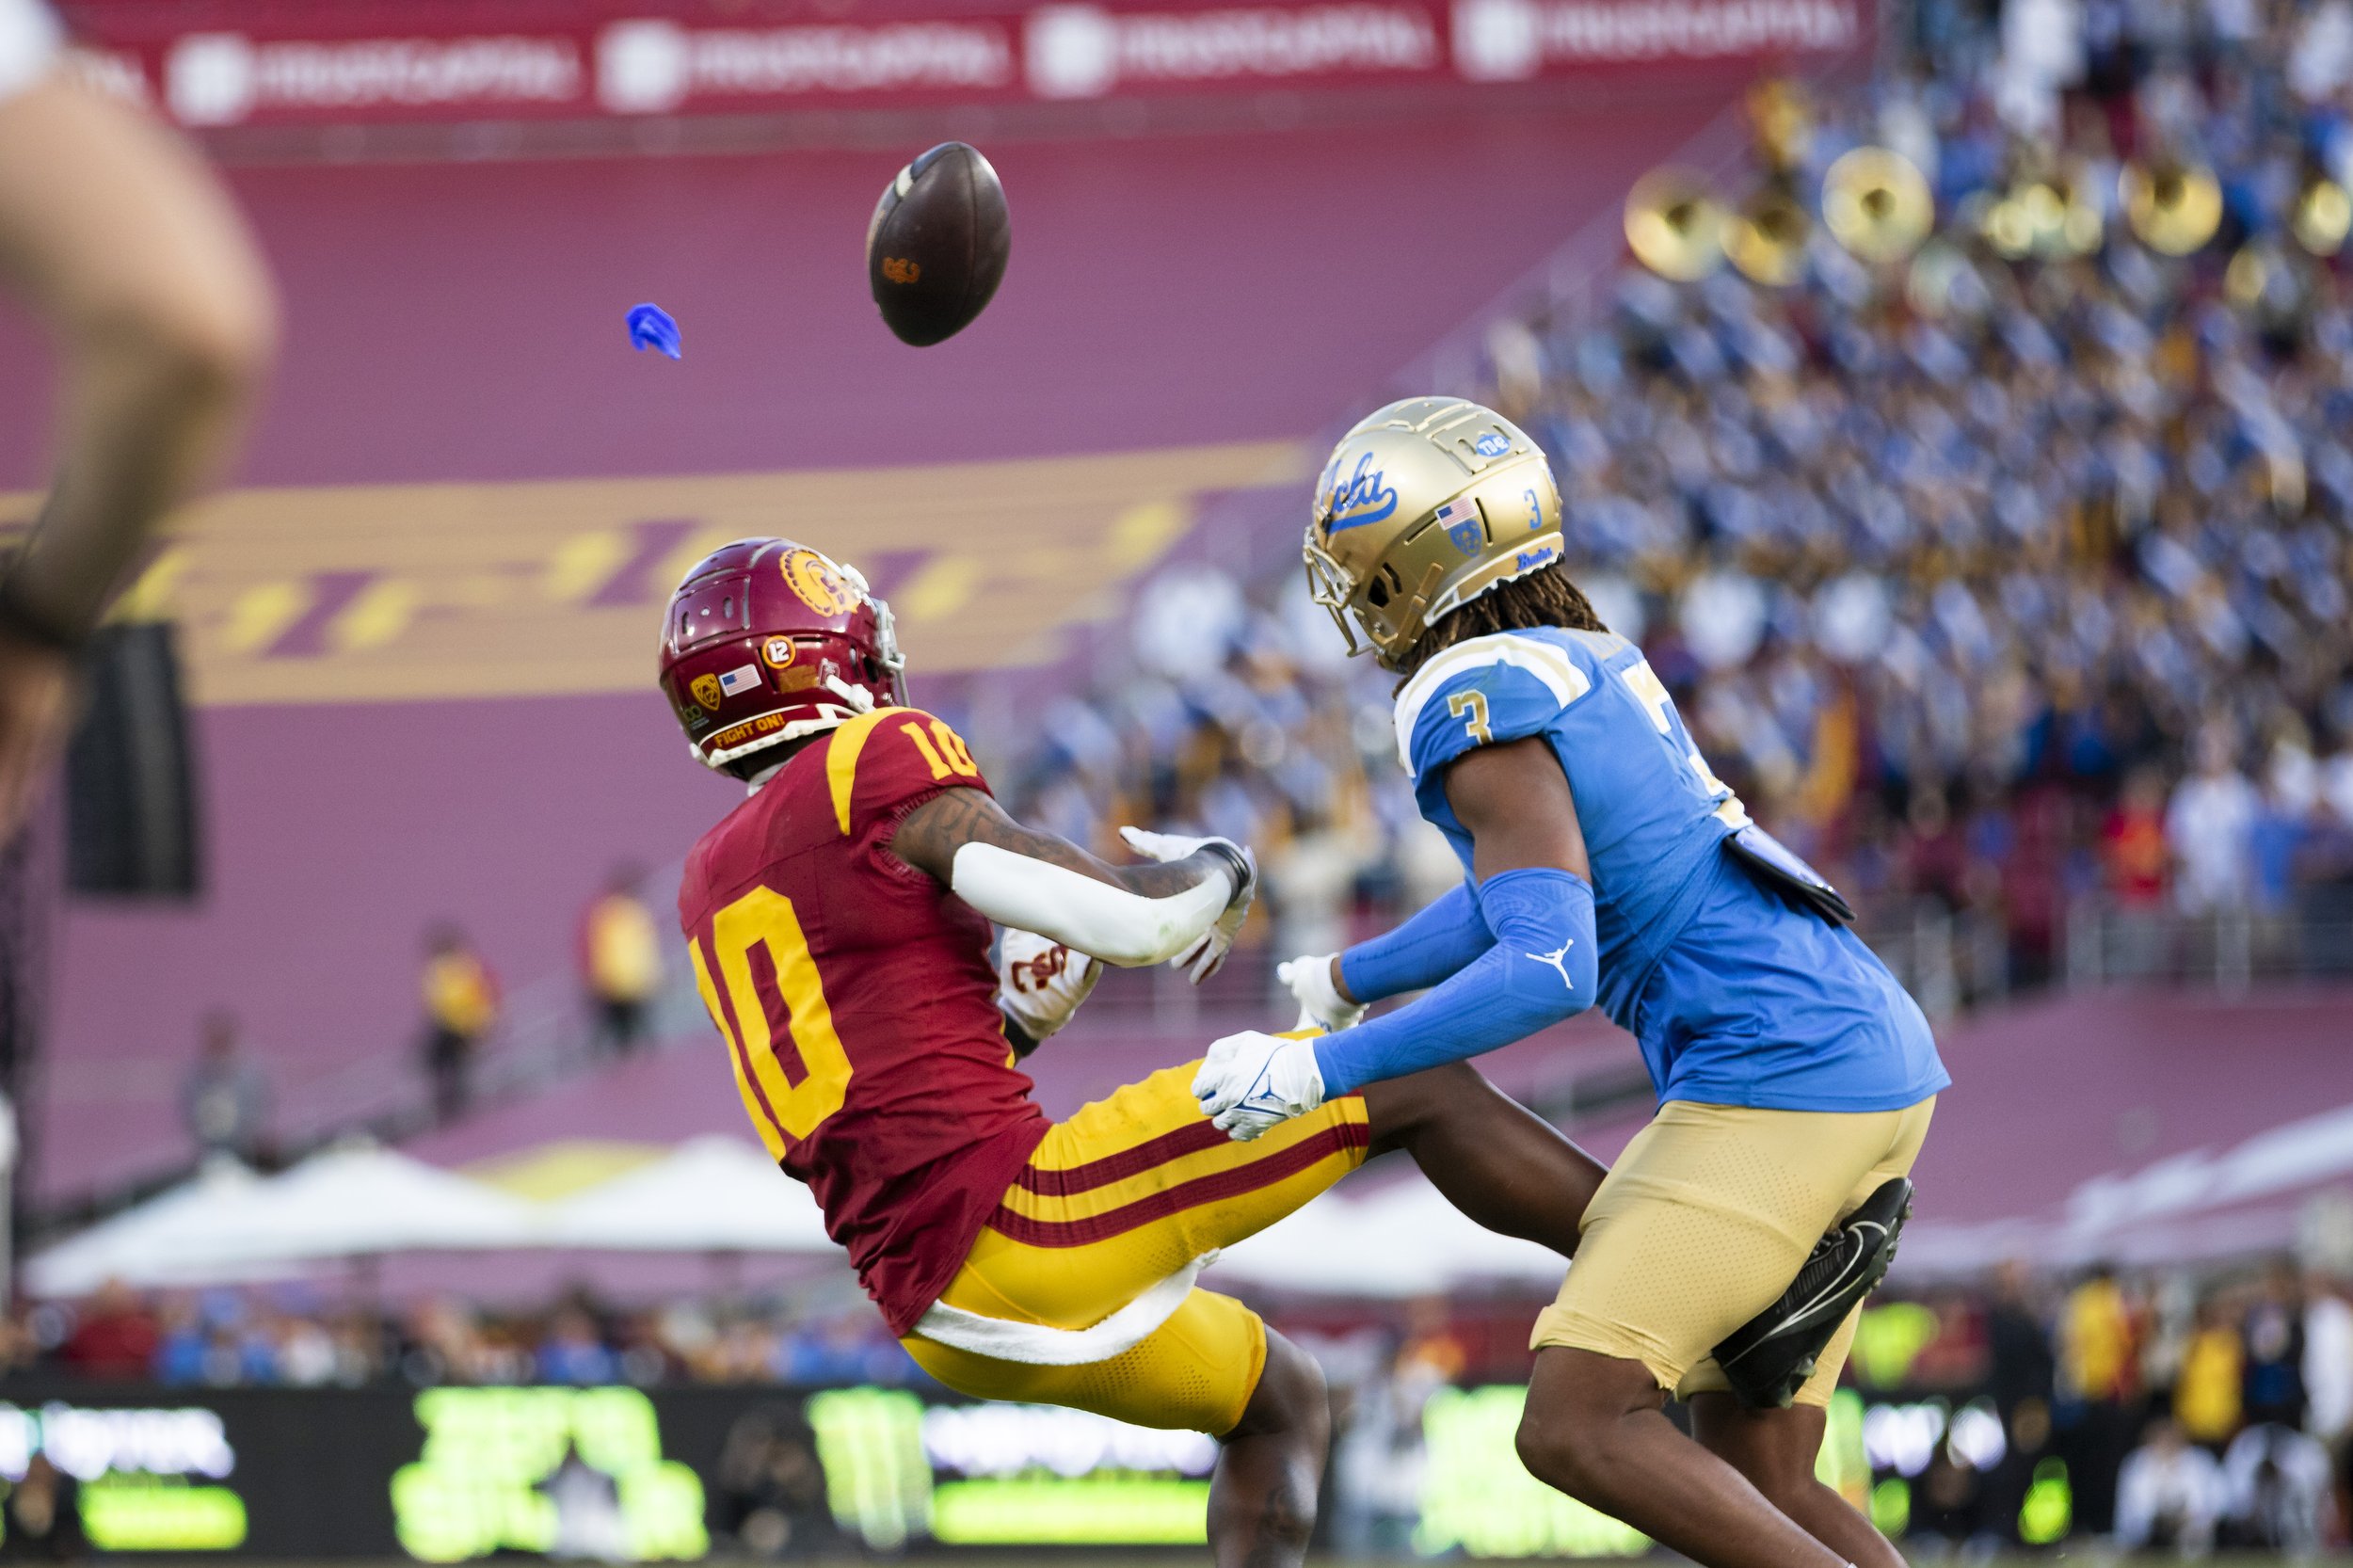  University of Southern California (USC) Trojan wide receiver Kyron Hudson (left) failing to complete a pass while being tackled by University of California, Los Angeles (UCLA) Bruin defensive back Devin Kirkwood (right) during the fourth quarter of 